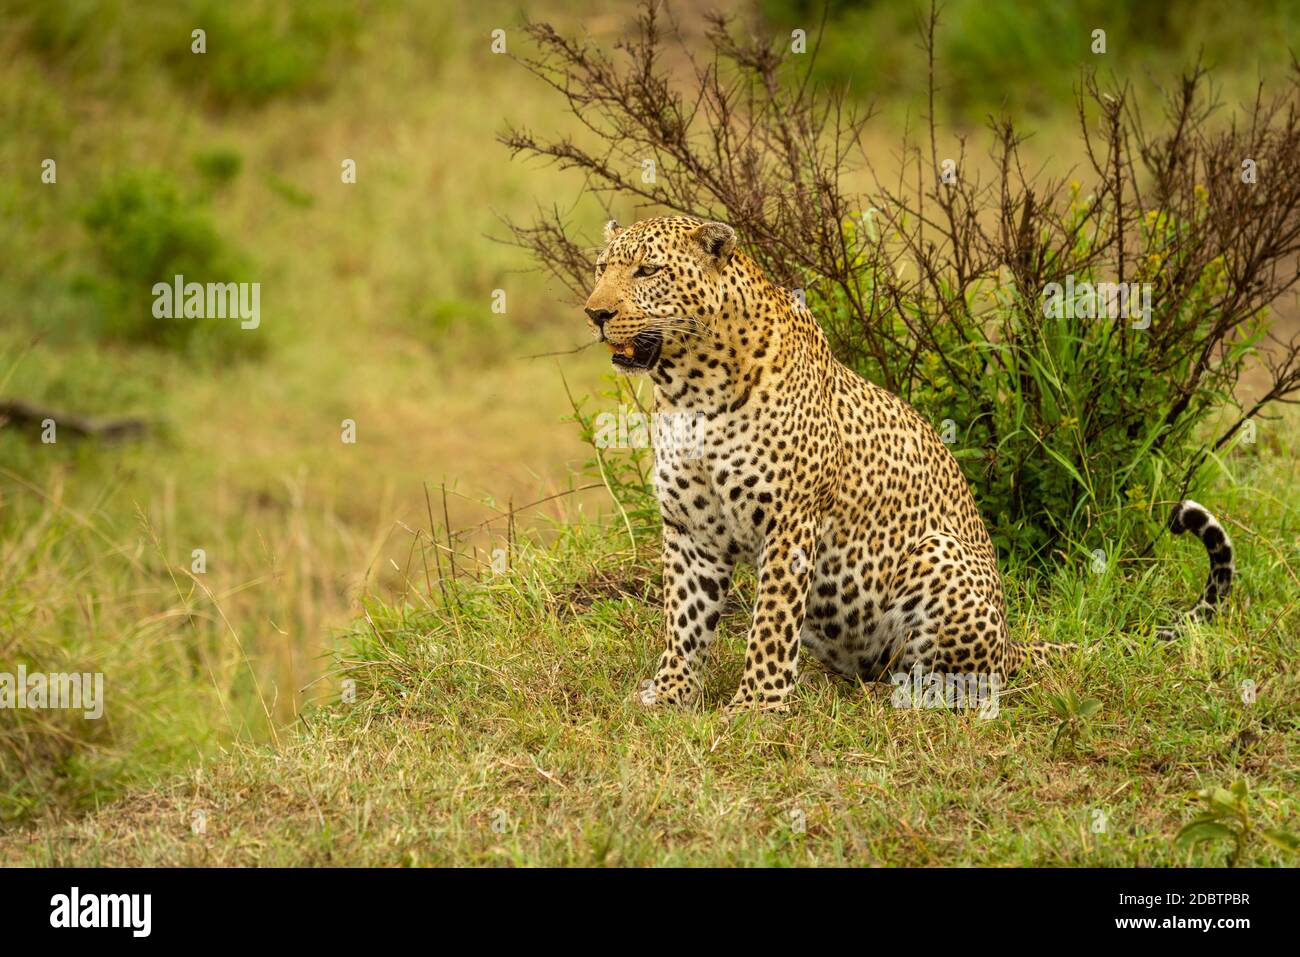 Leopard sits on grass with open mouth Stock Photo